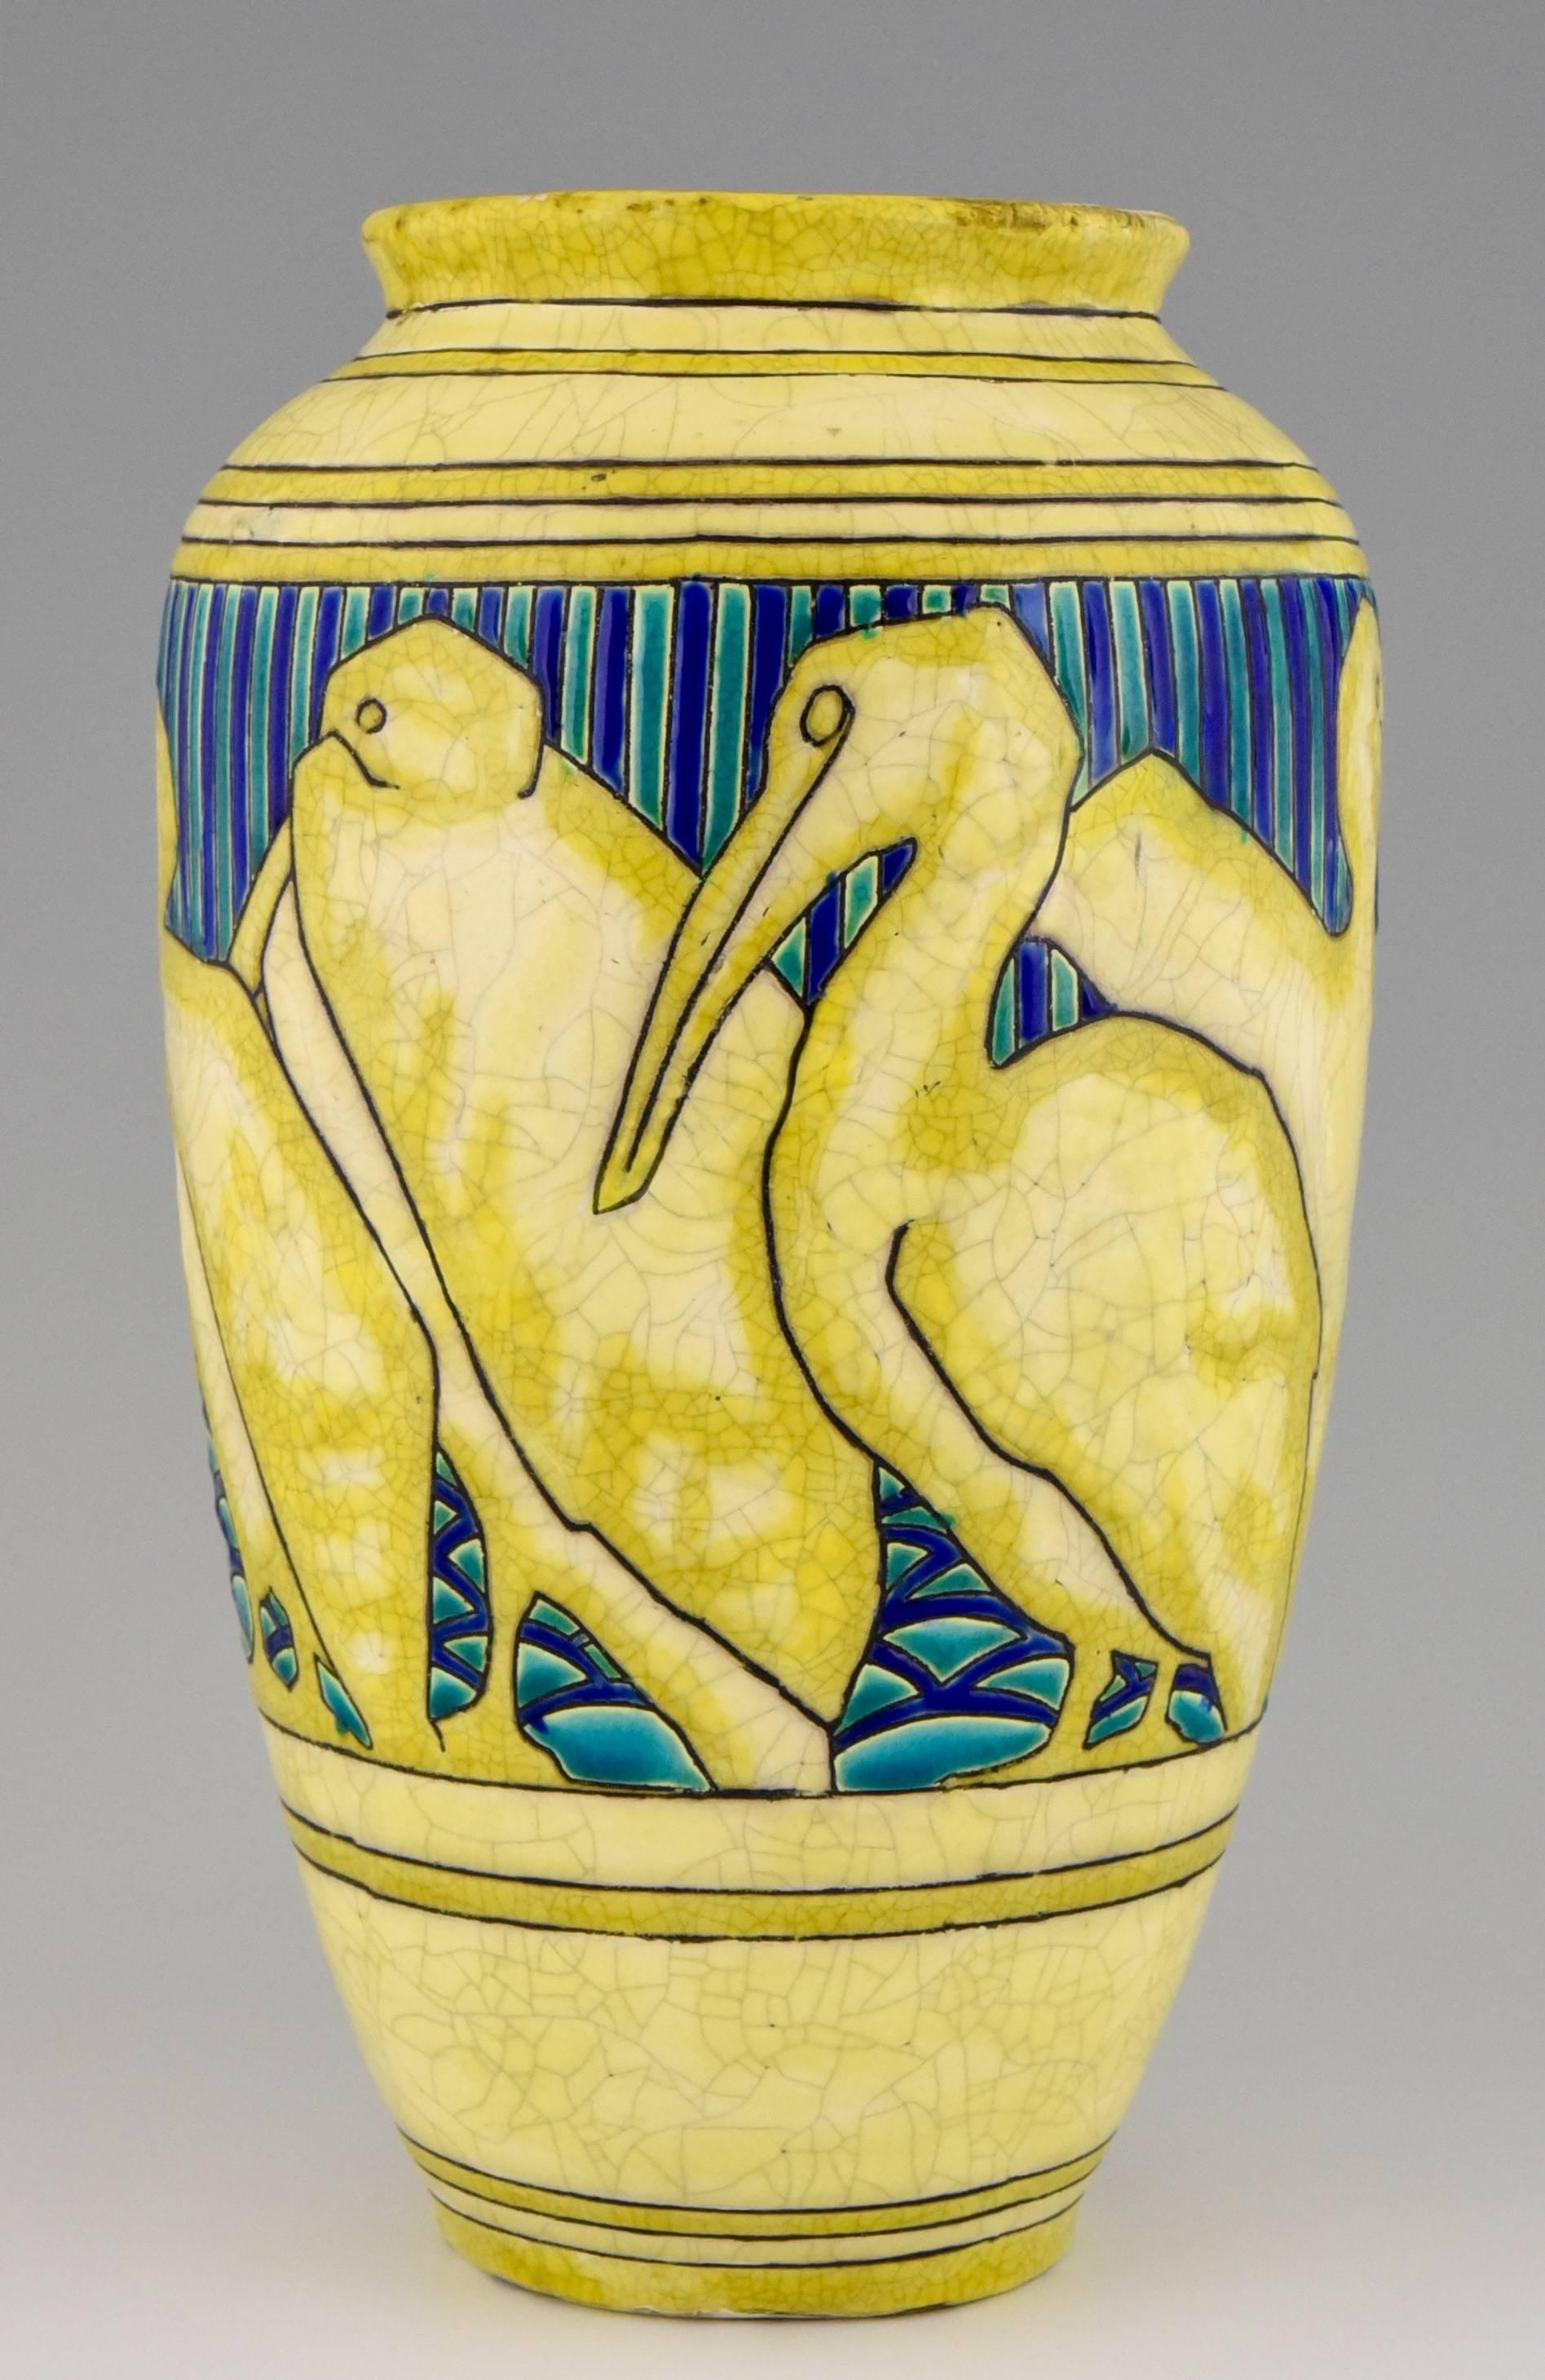 Description: 
Charles Catteau Art Deco vase with pelicans. 

Artist/ Maker:
Charles Catteau,

Signature/ Marks: 
Ch. Catteau.
Stamped:Boch Freres La Louviere fabrication belge.
D 984 ( created in 1924)
Impressed number

Style: 
Art